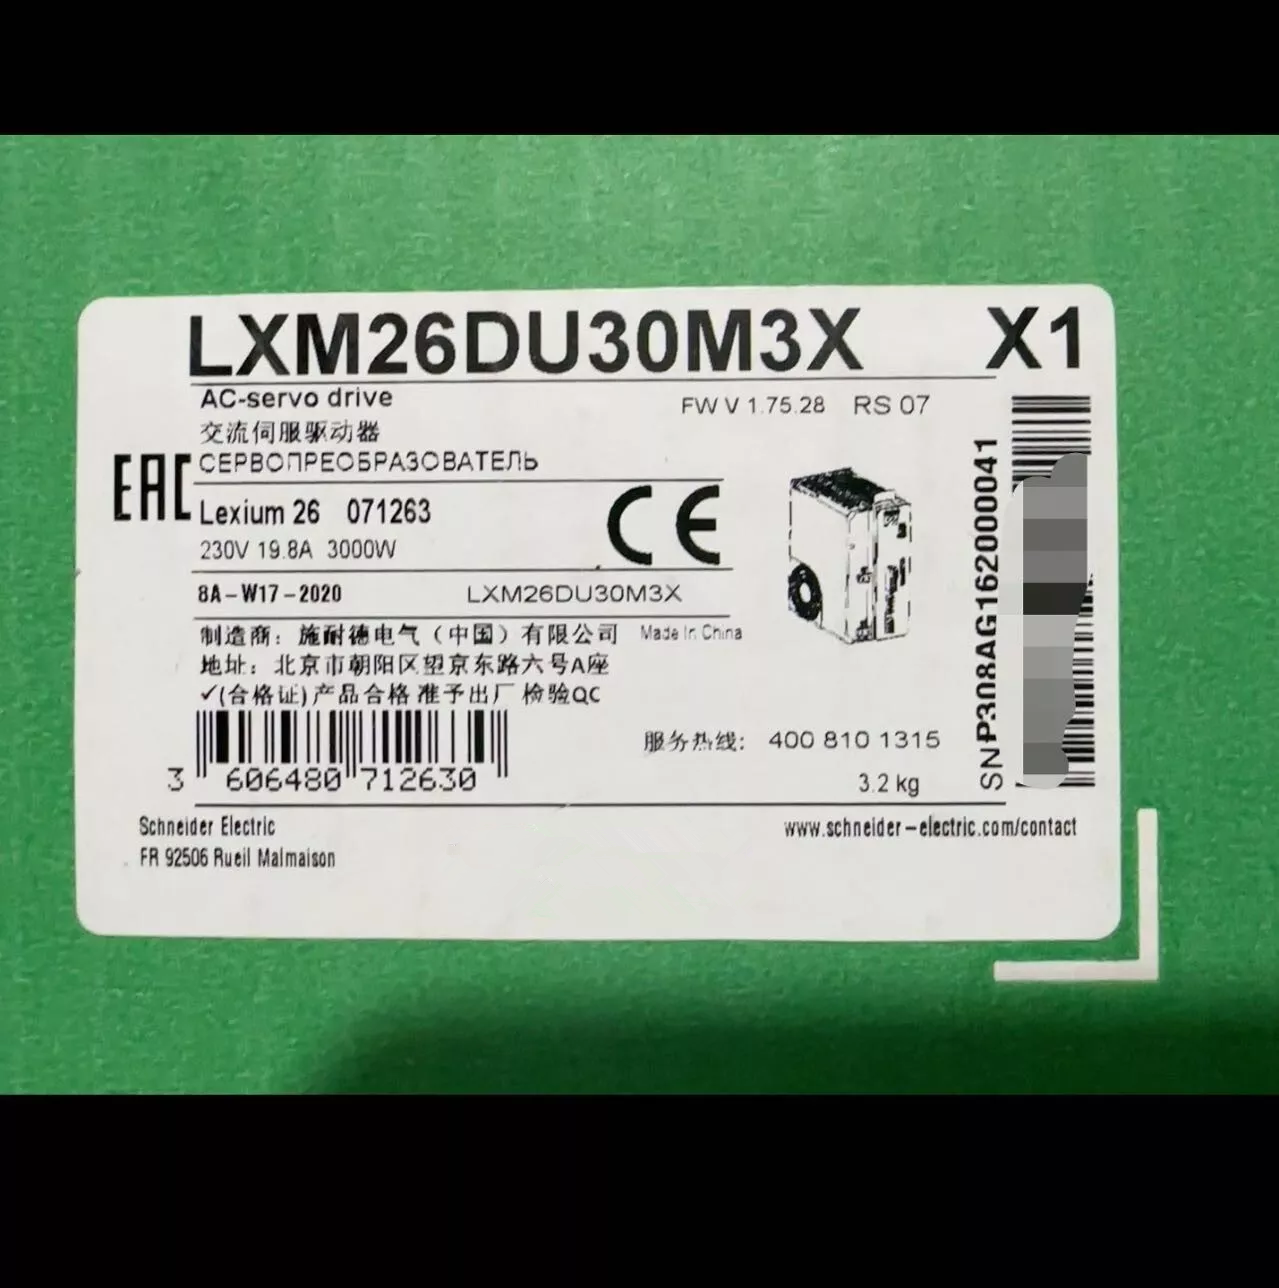 1PC New LXM28SU02M3X Servo Drive Via DHL Expedited Shipping In Stock